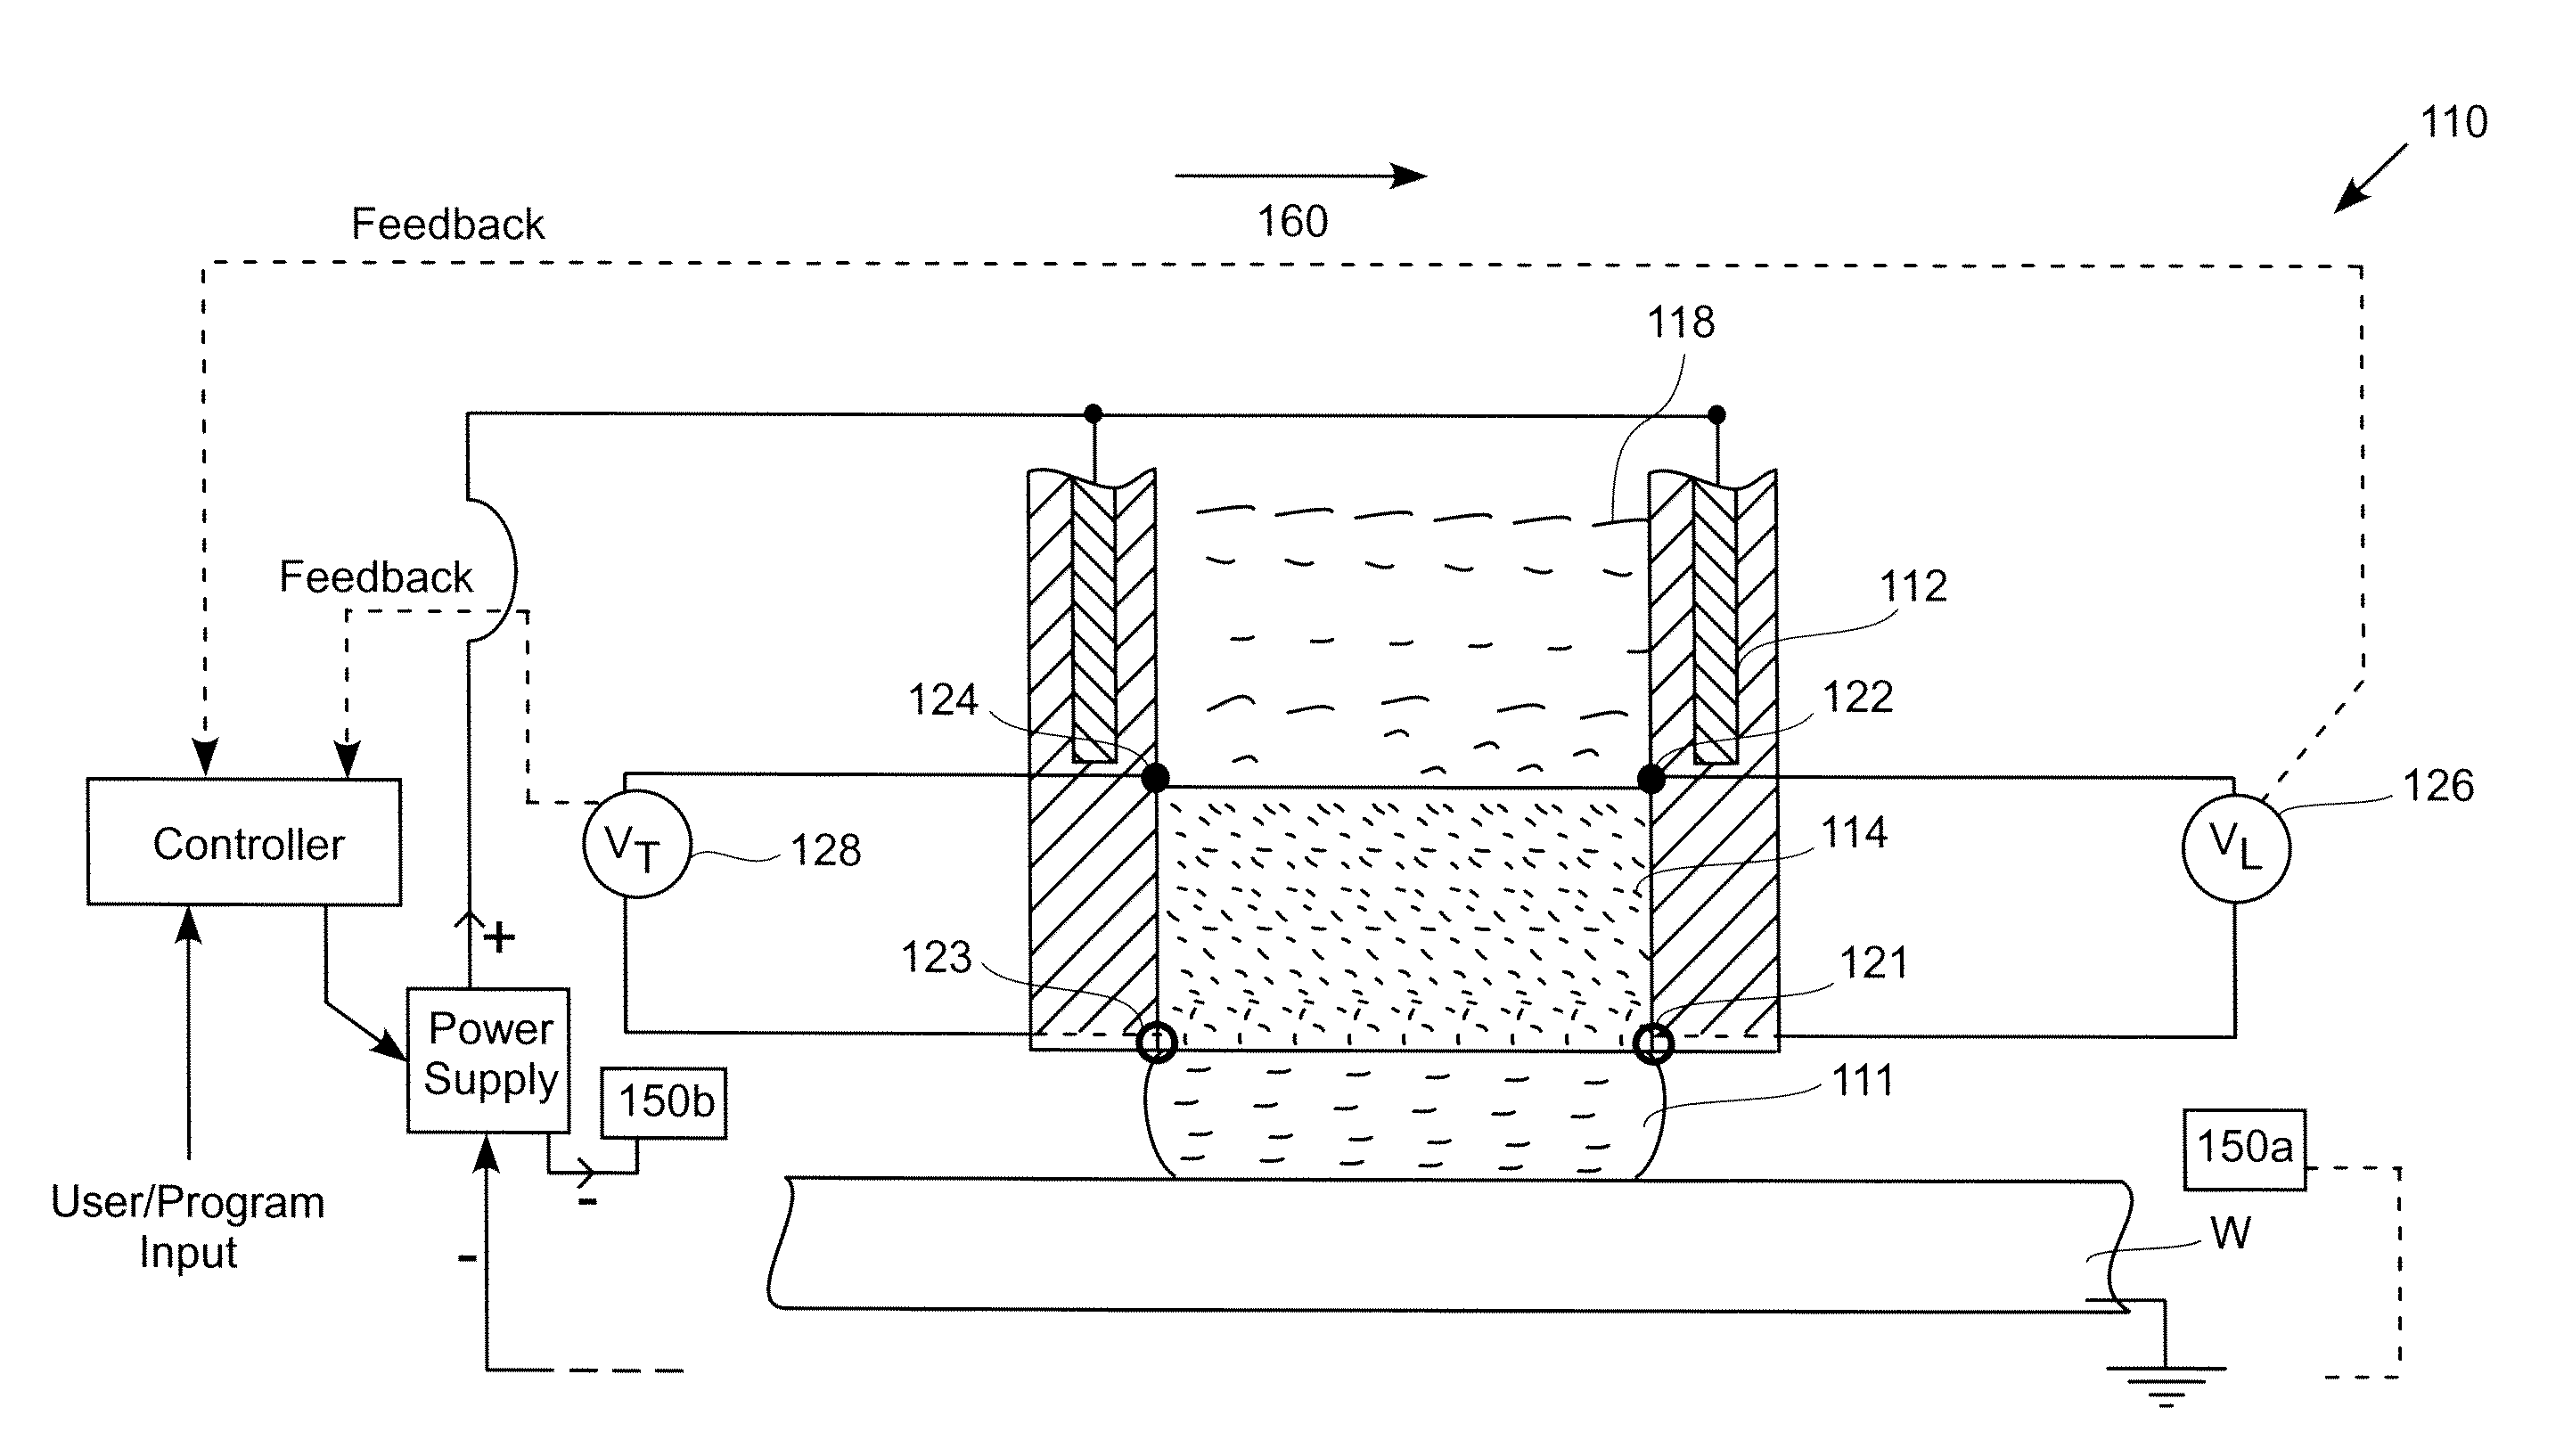 Apparatus for Plating Semiconductor Wafers